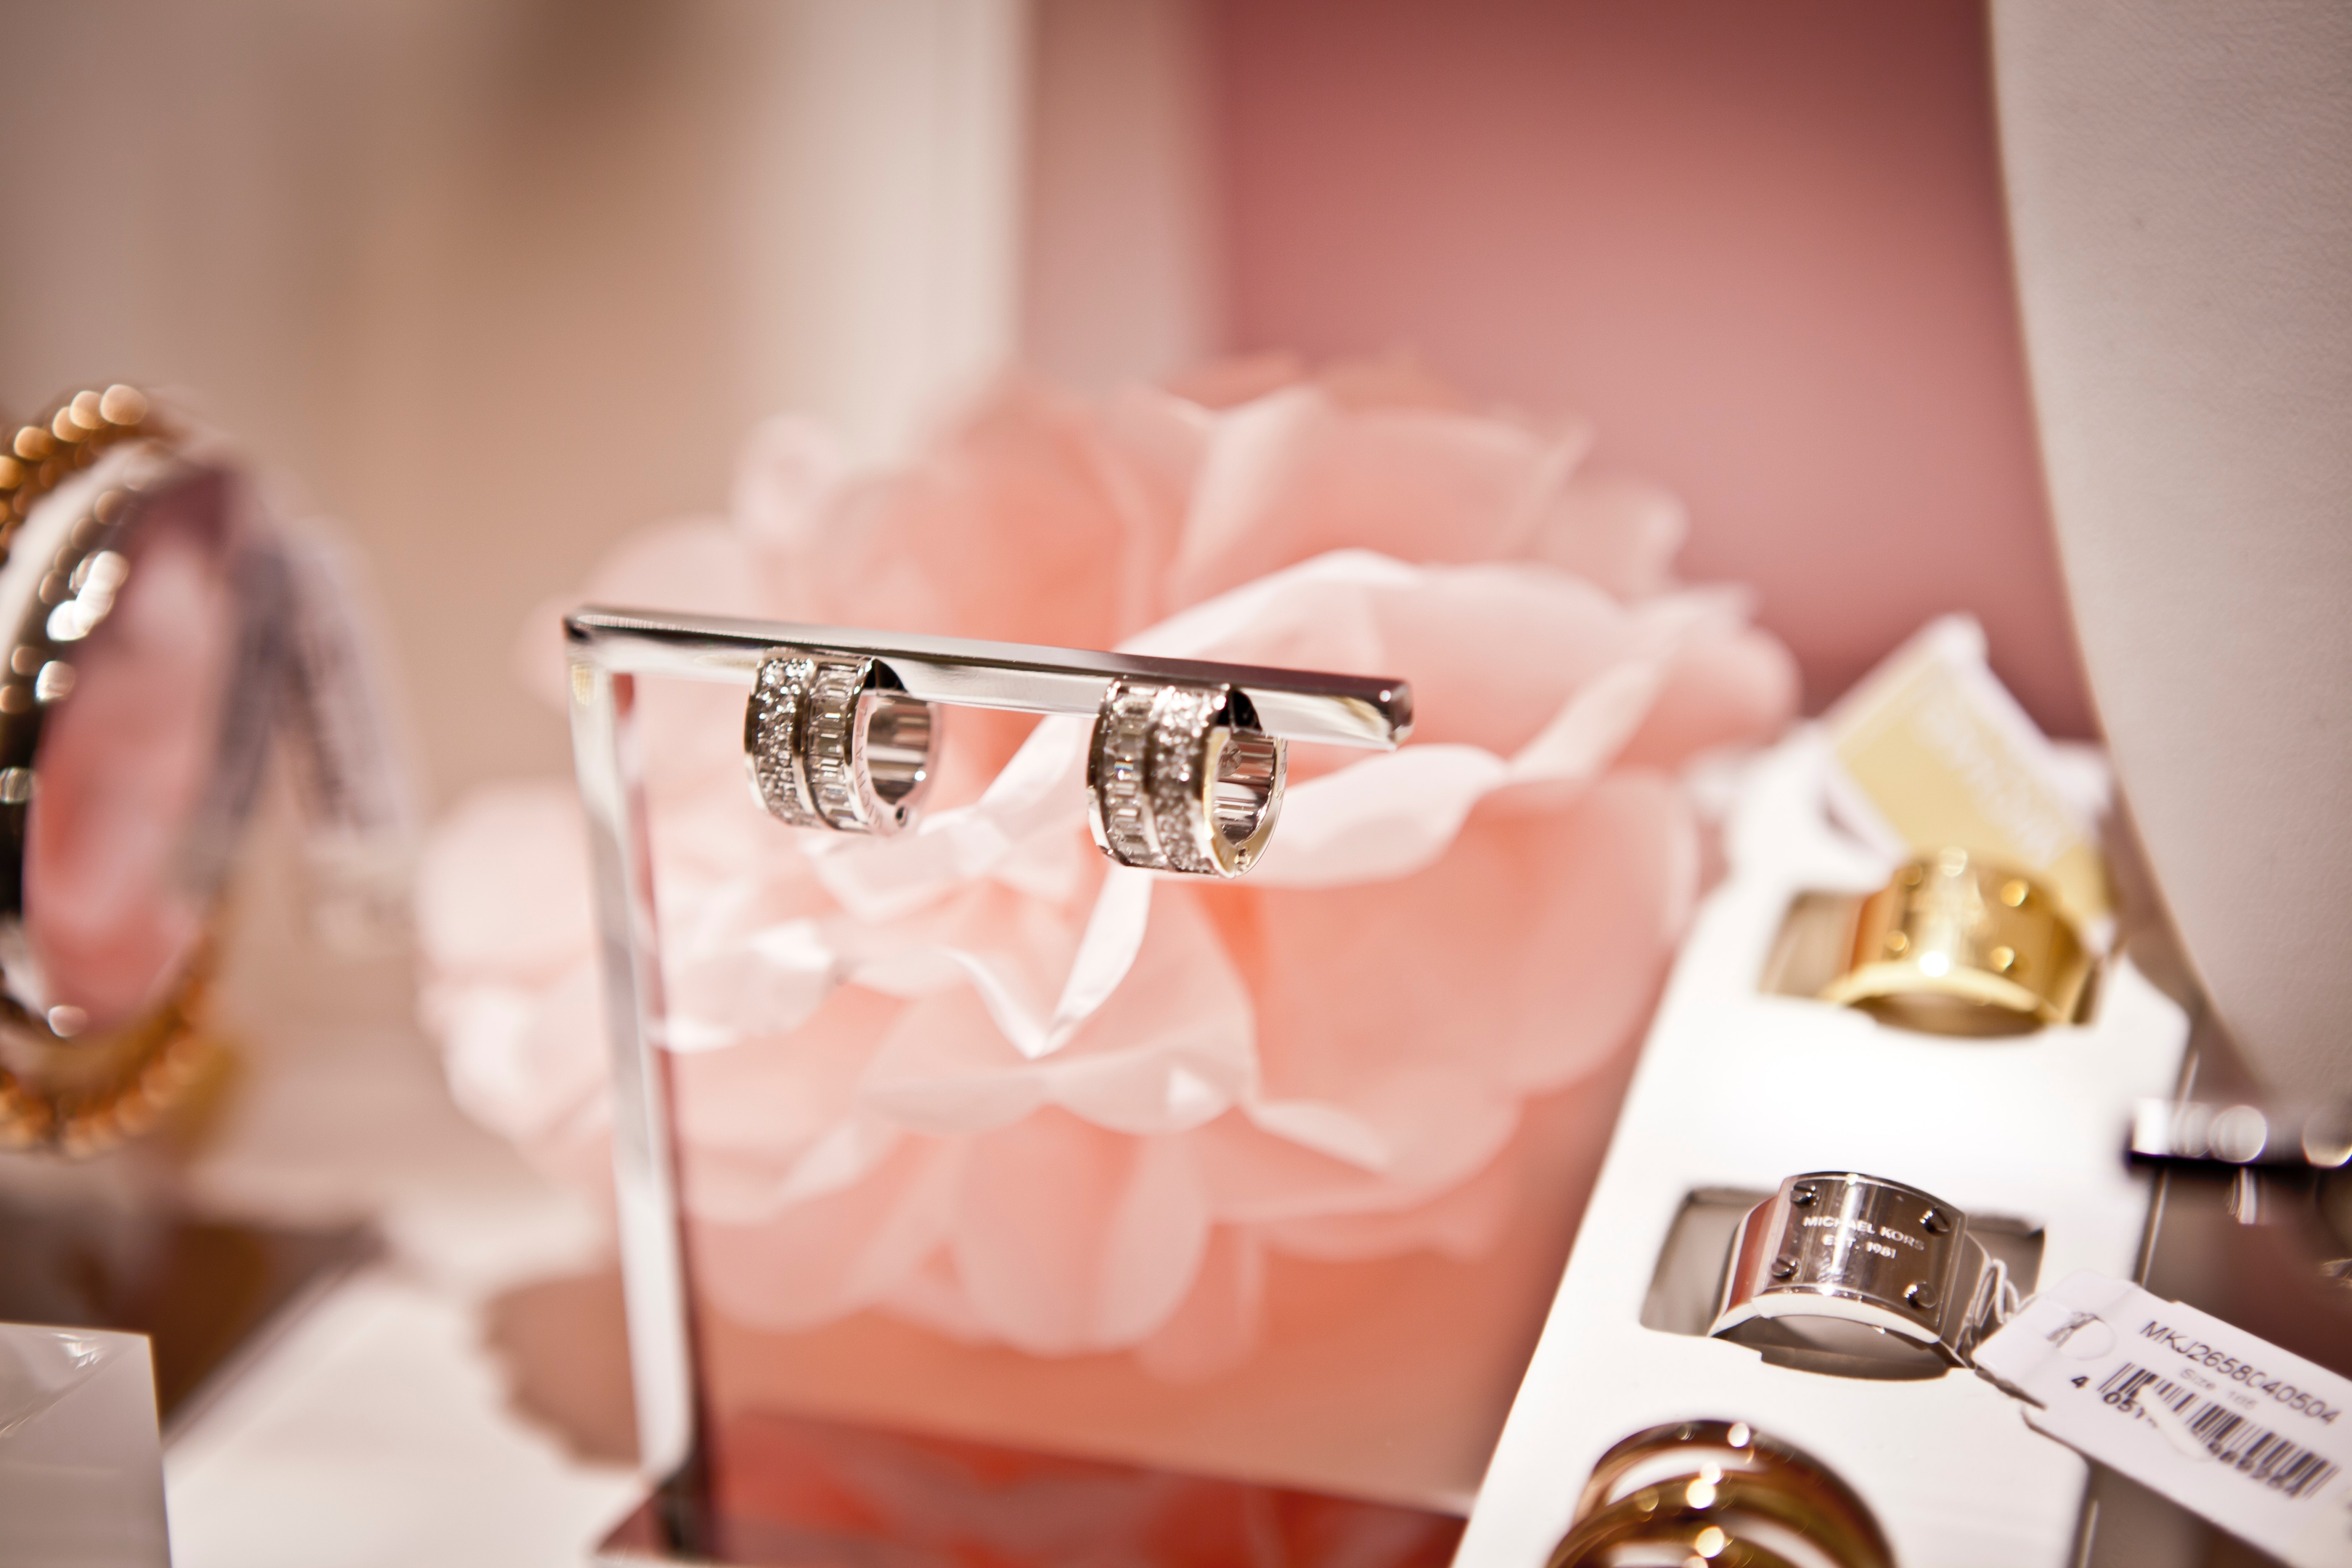 Silver colored ring in a box || Photo by Terje Sollie || sourced from Pexels